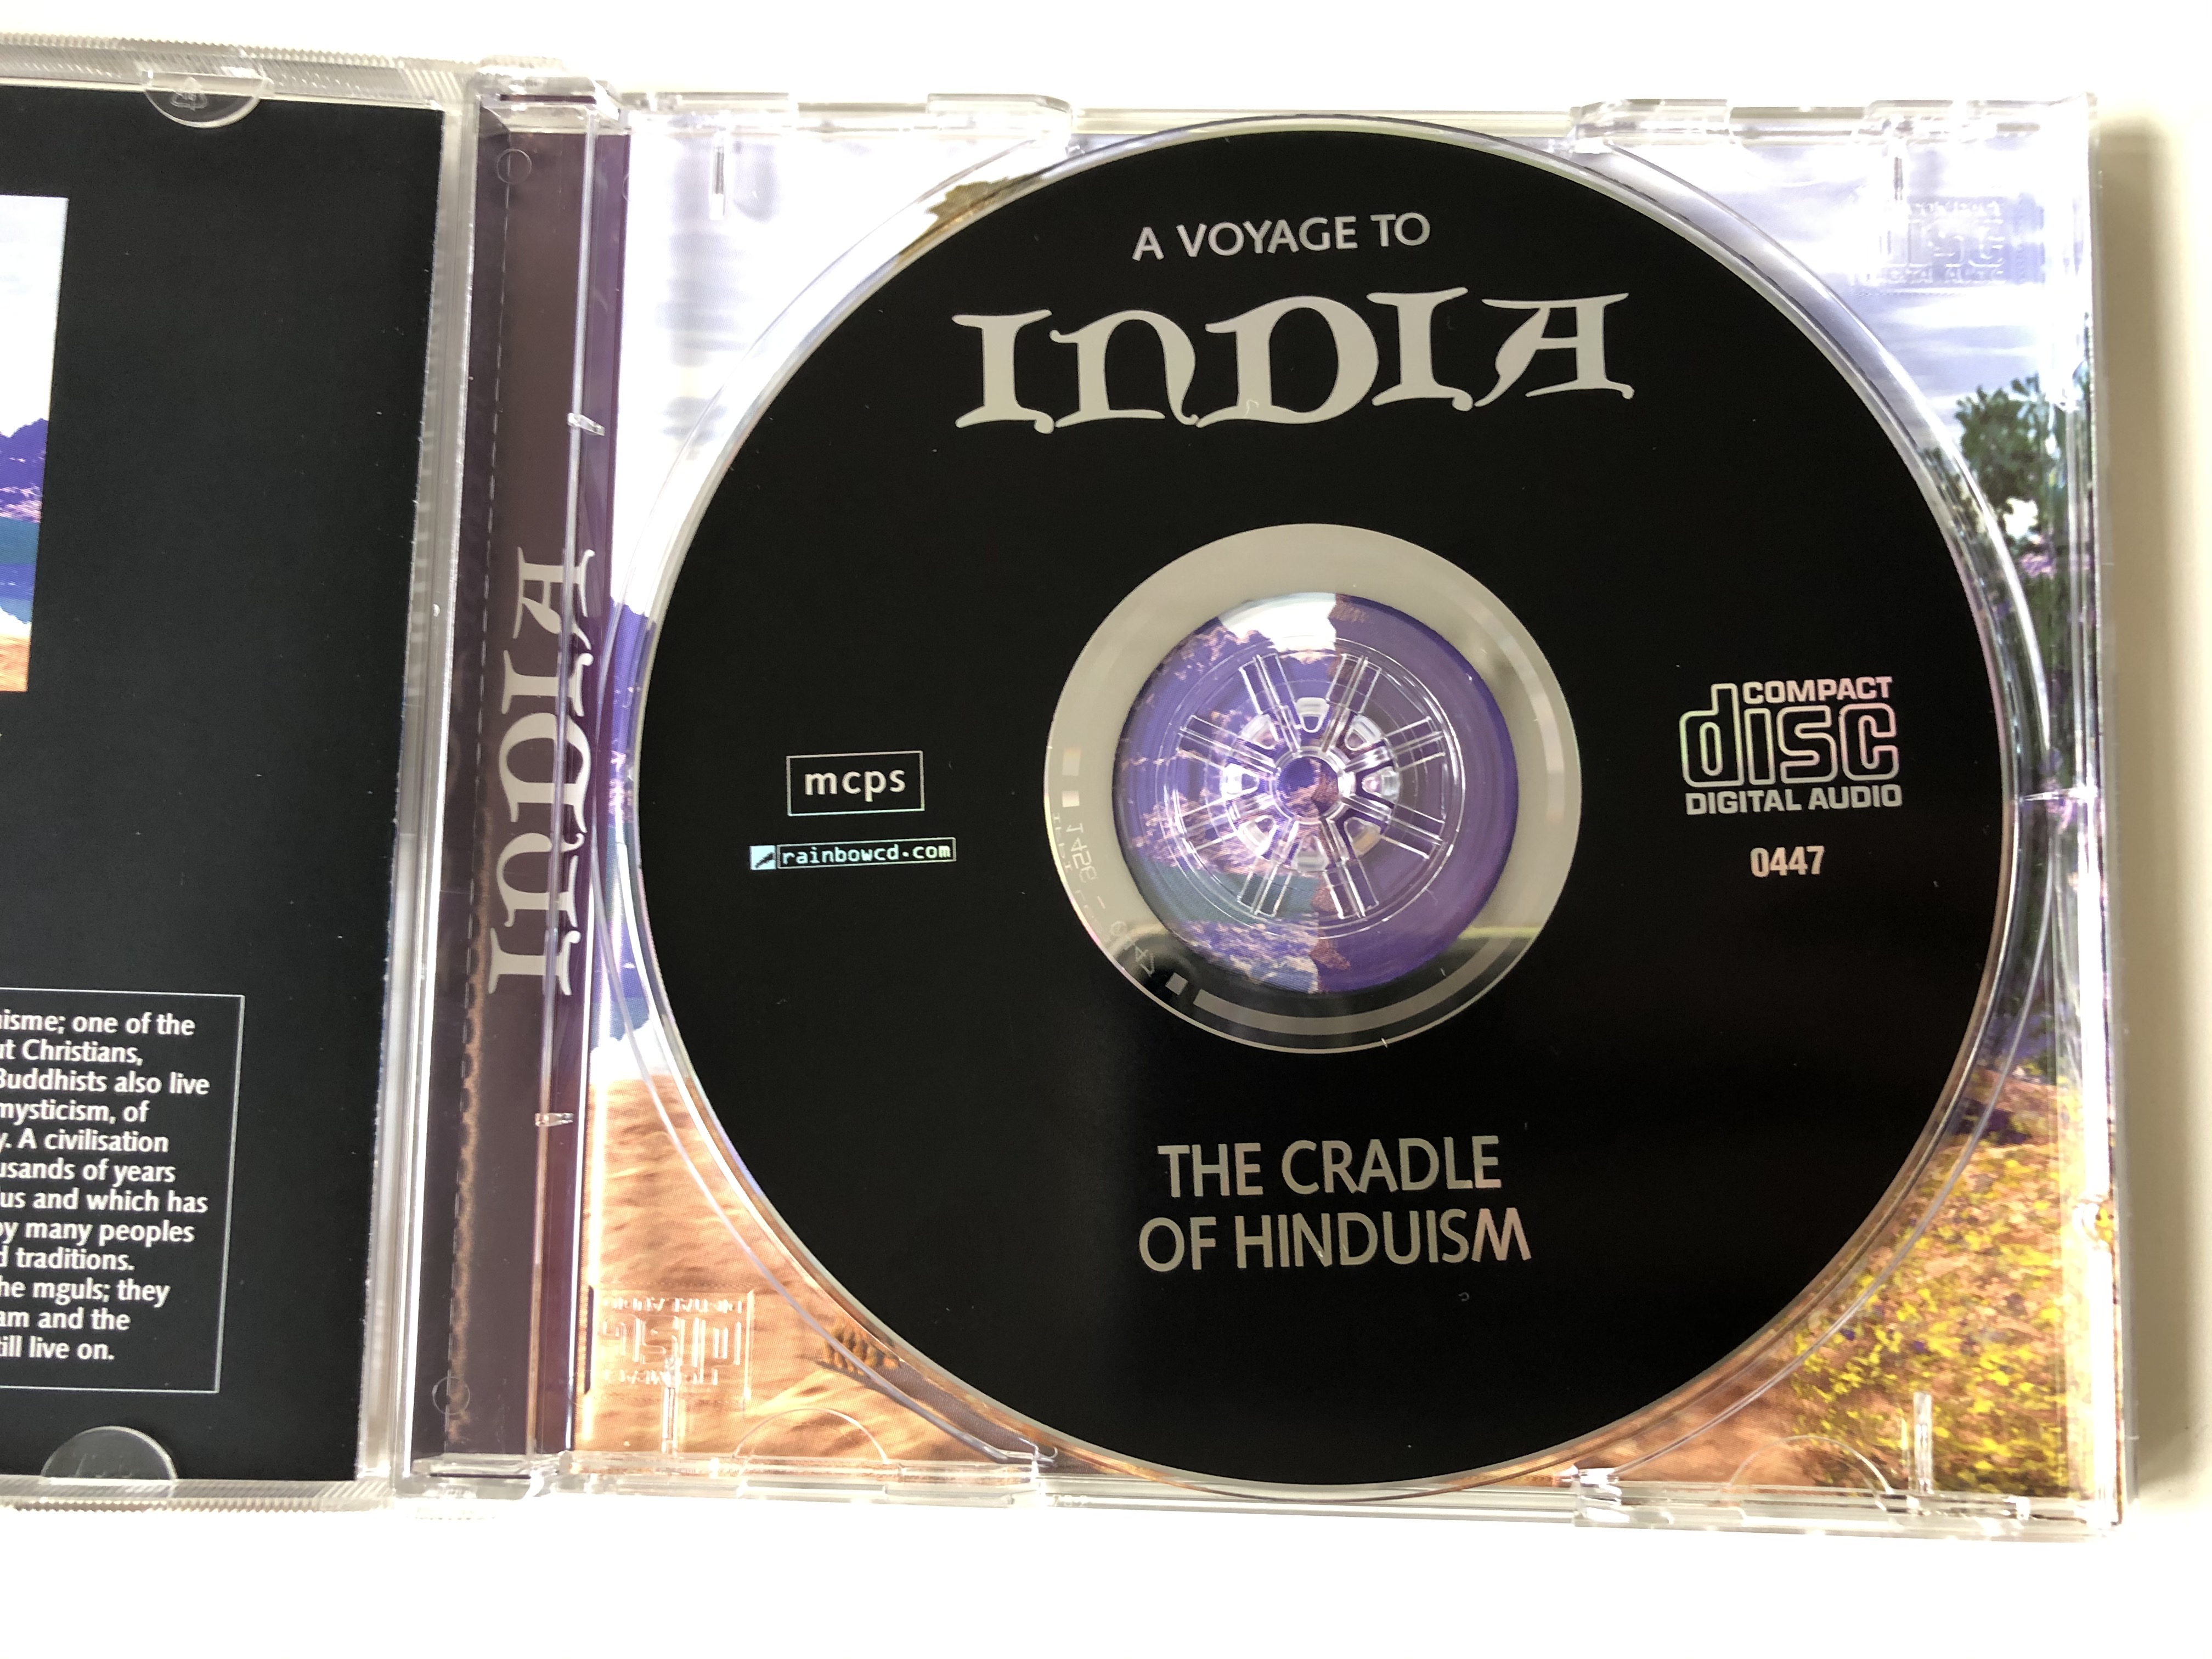 a-voyage-to-india-a-collection-of-ambient-music-remixed-with-native-sound-mastertone-audio-cd-1998-0447-3-.jpg